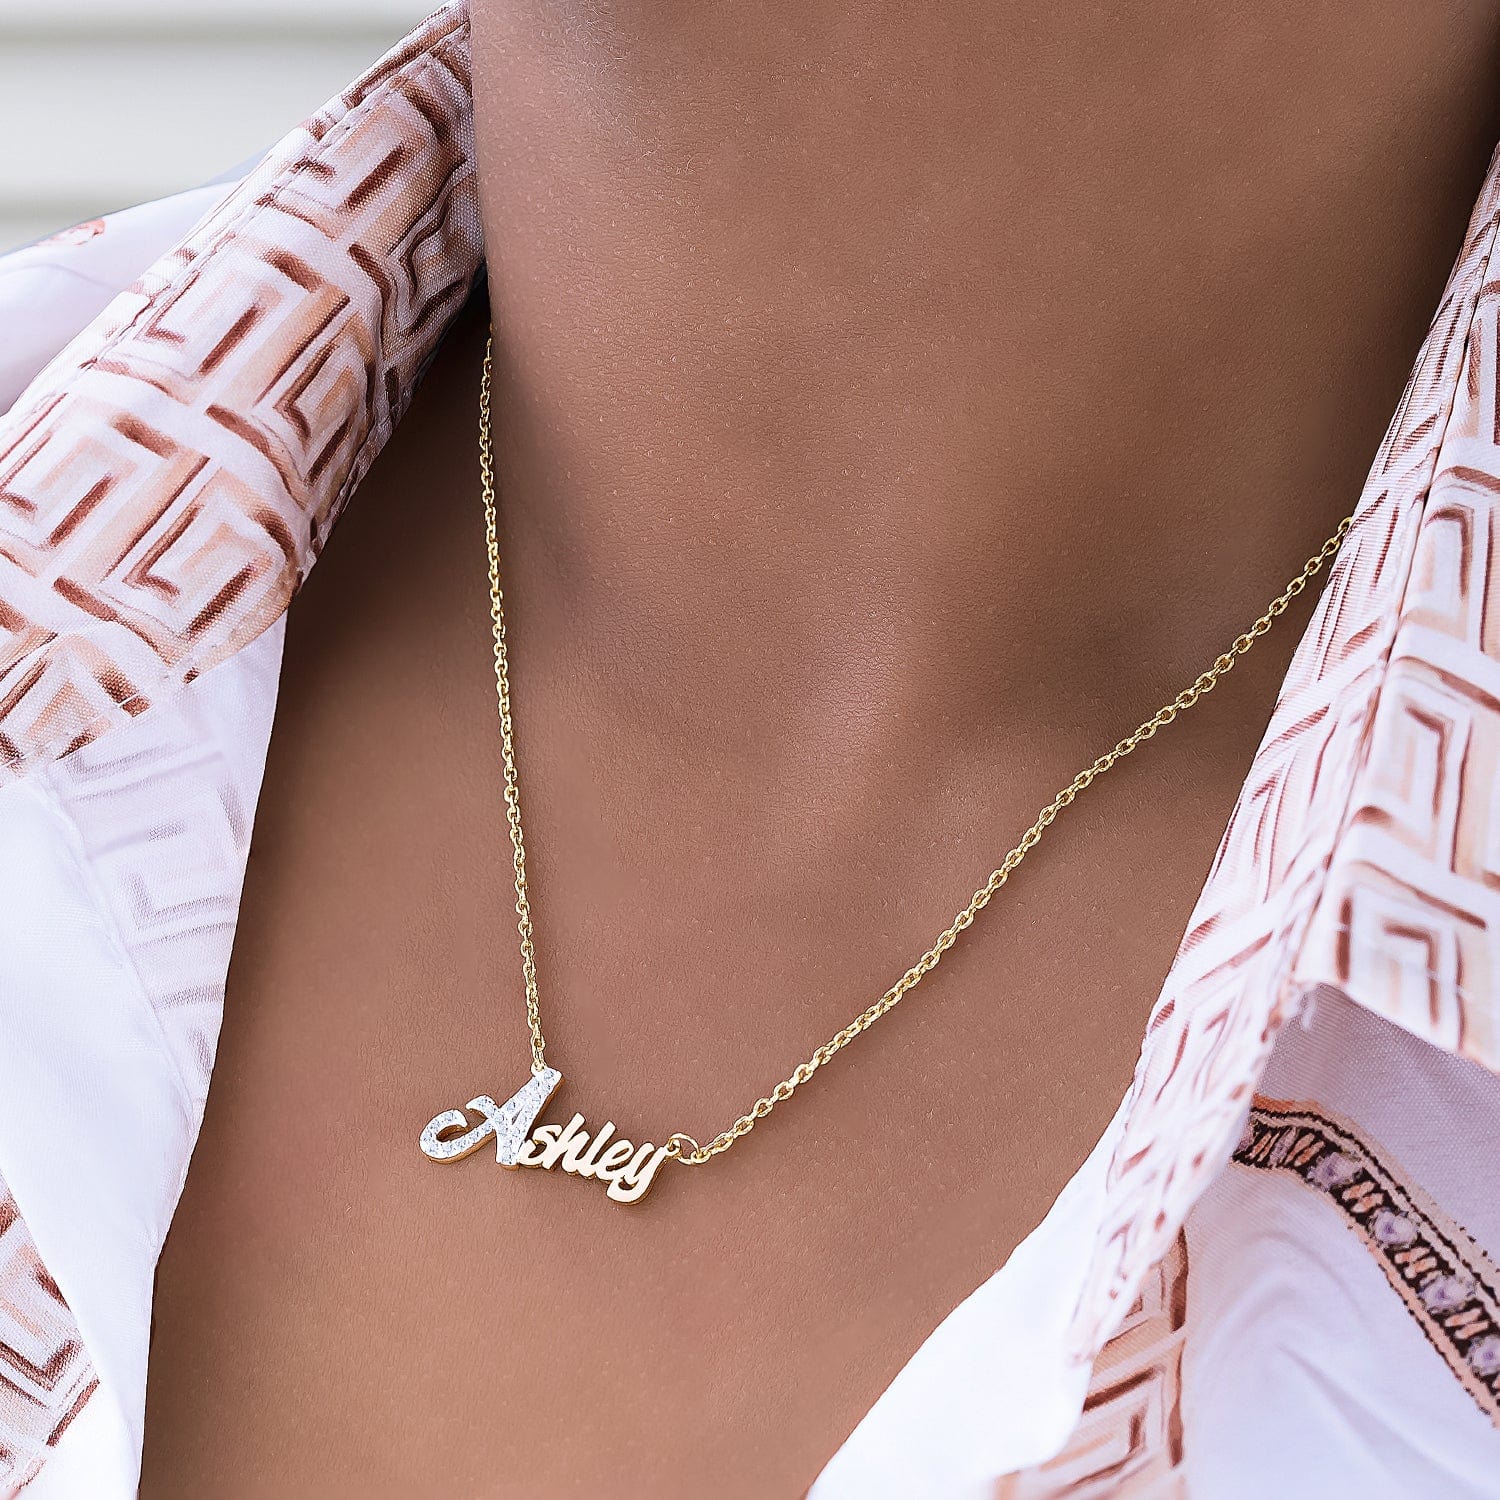 14k Gold over Sterling Silver / Cuban Chain Single Plated Nameplate Necklace "Ashley" with Stones